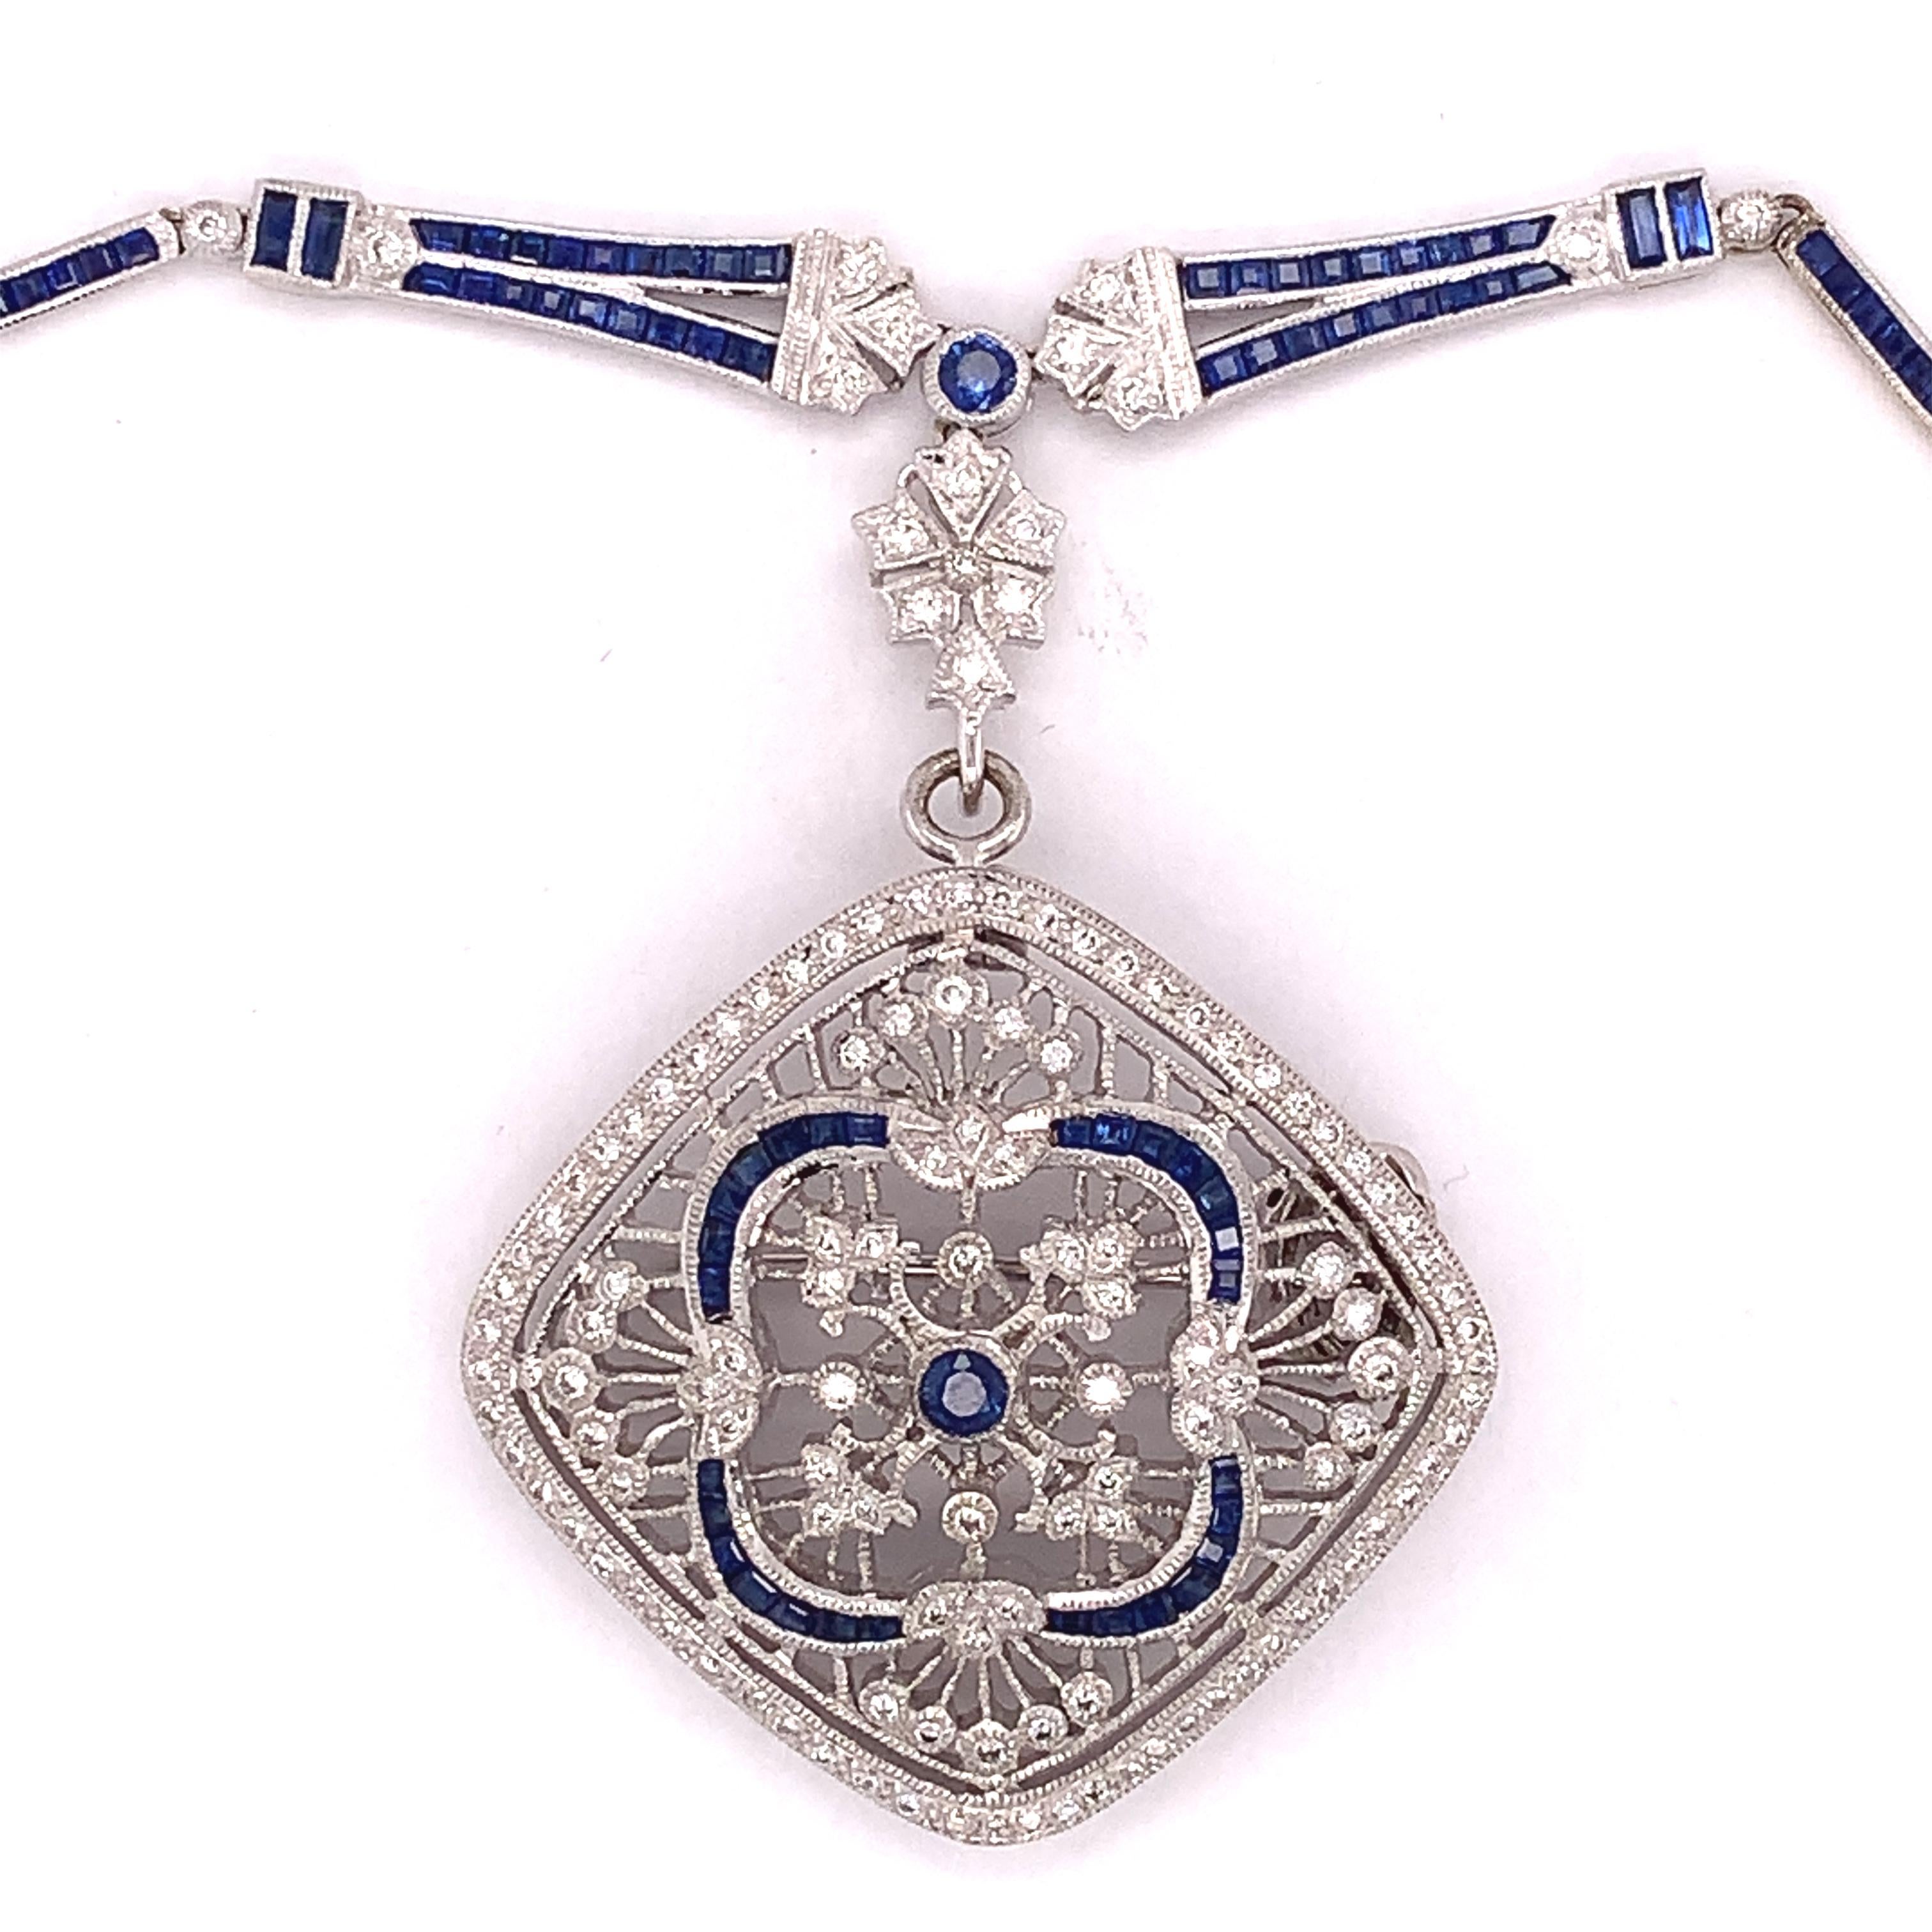 18k White Gold Genuine Natural Sapphire and Diamond Deco Style Necklace (#J4854)

Incredible 18k white gold sapphire and diamond necklace. There are six carats of specialty cut blue sapphires and just over one carat of diamonds - exactly 1.09